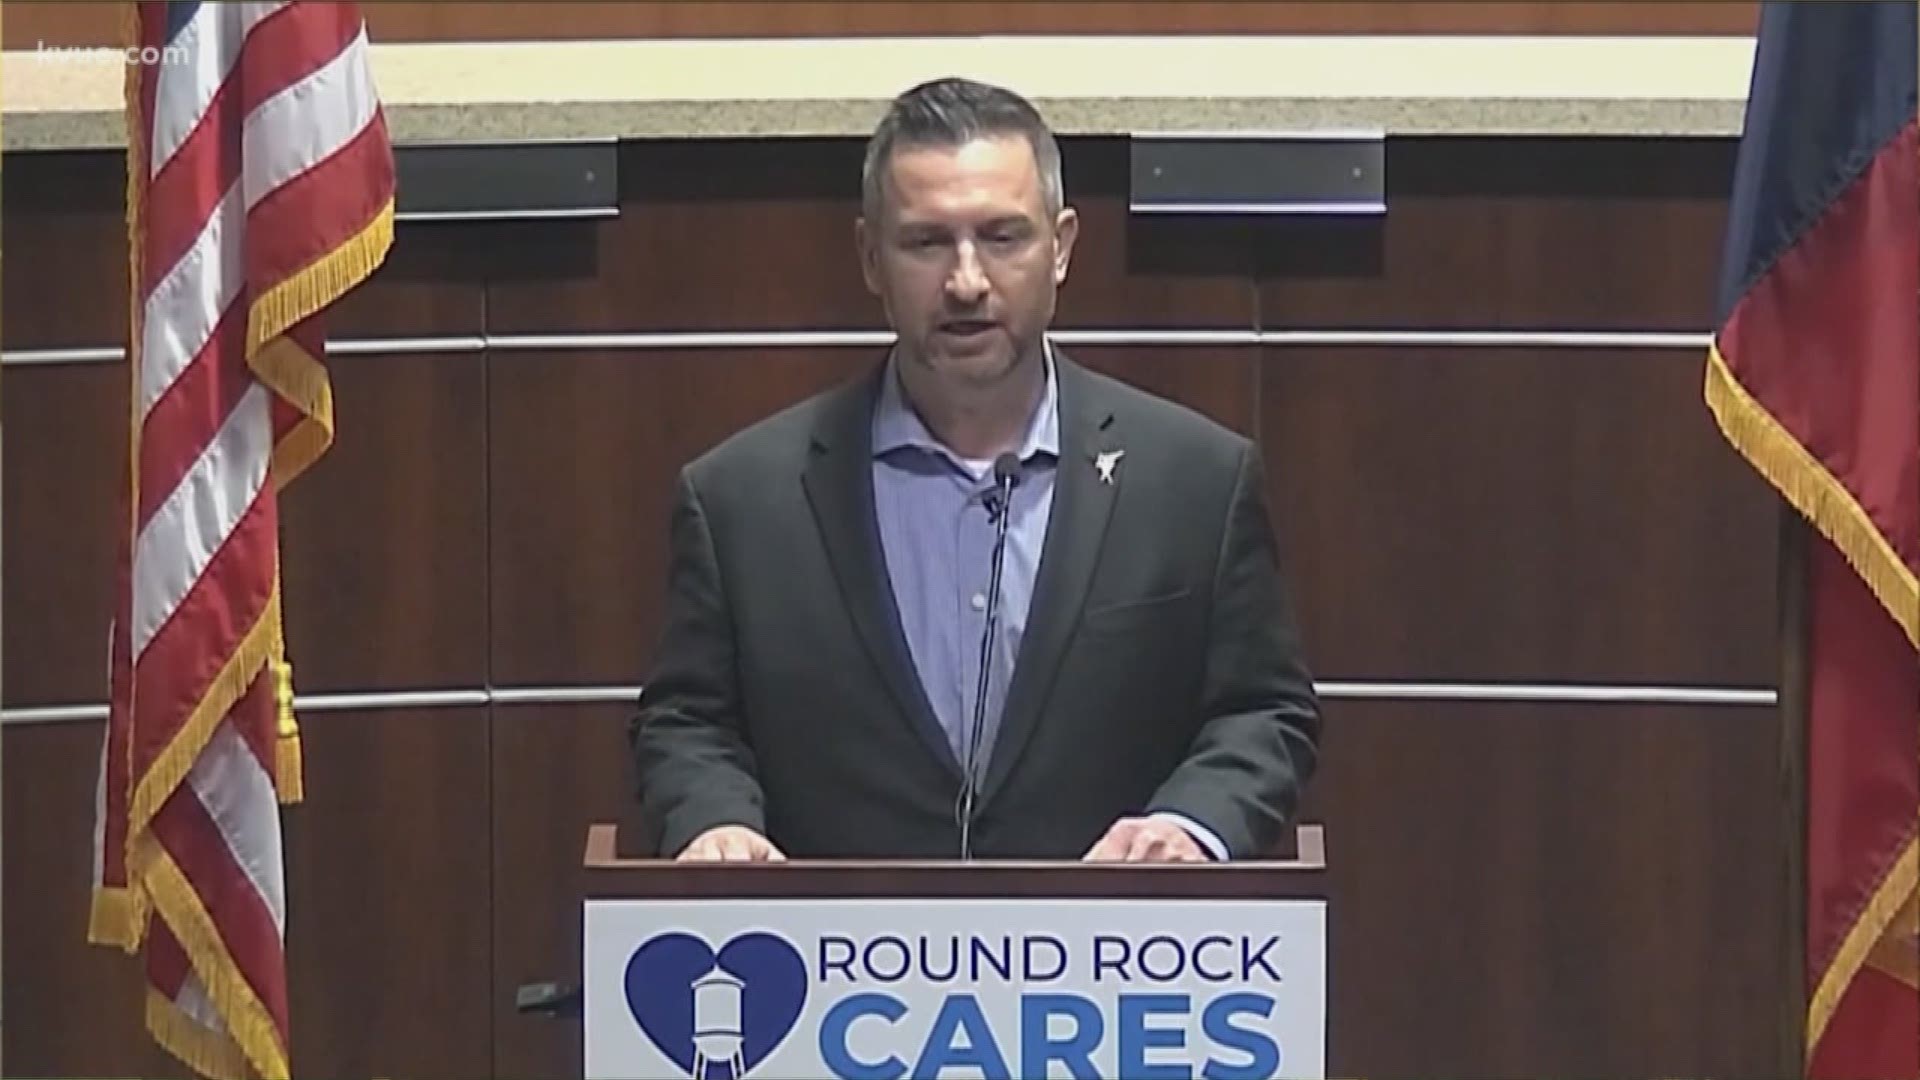 Round Rock Mayor Craig Morgan introduced a new program to help small businesses.